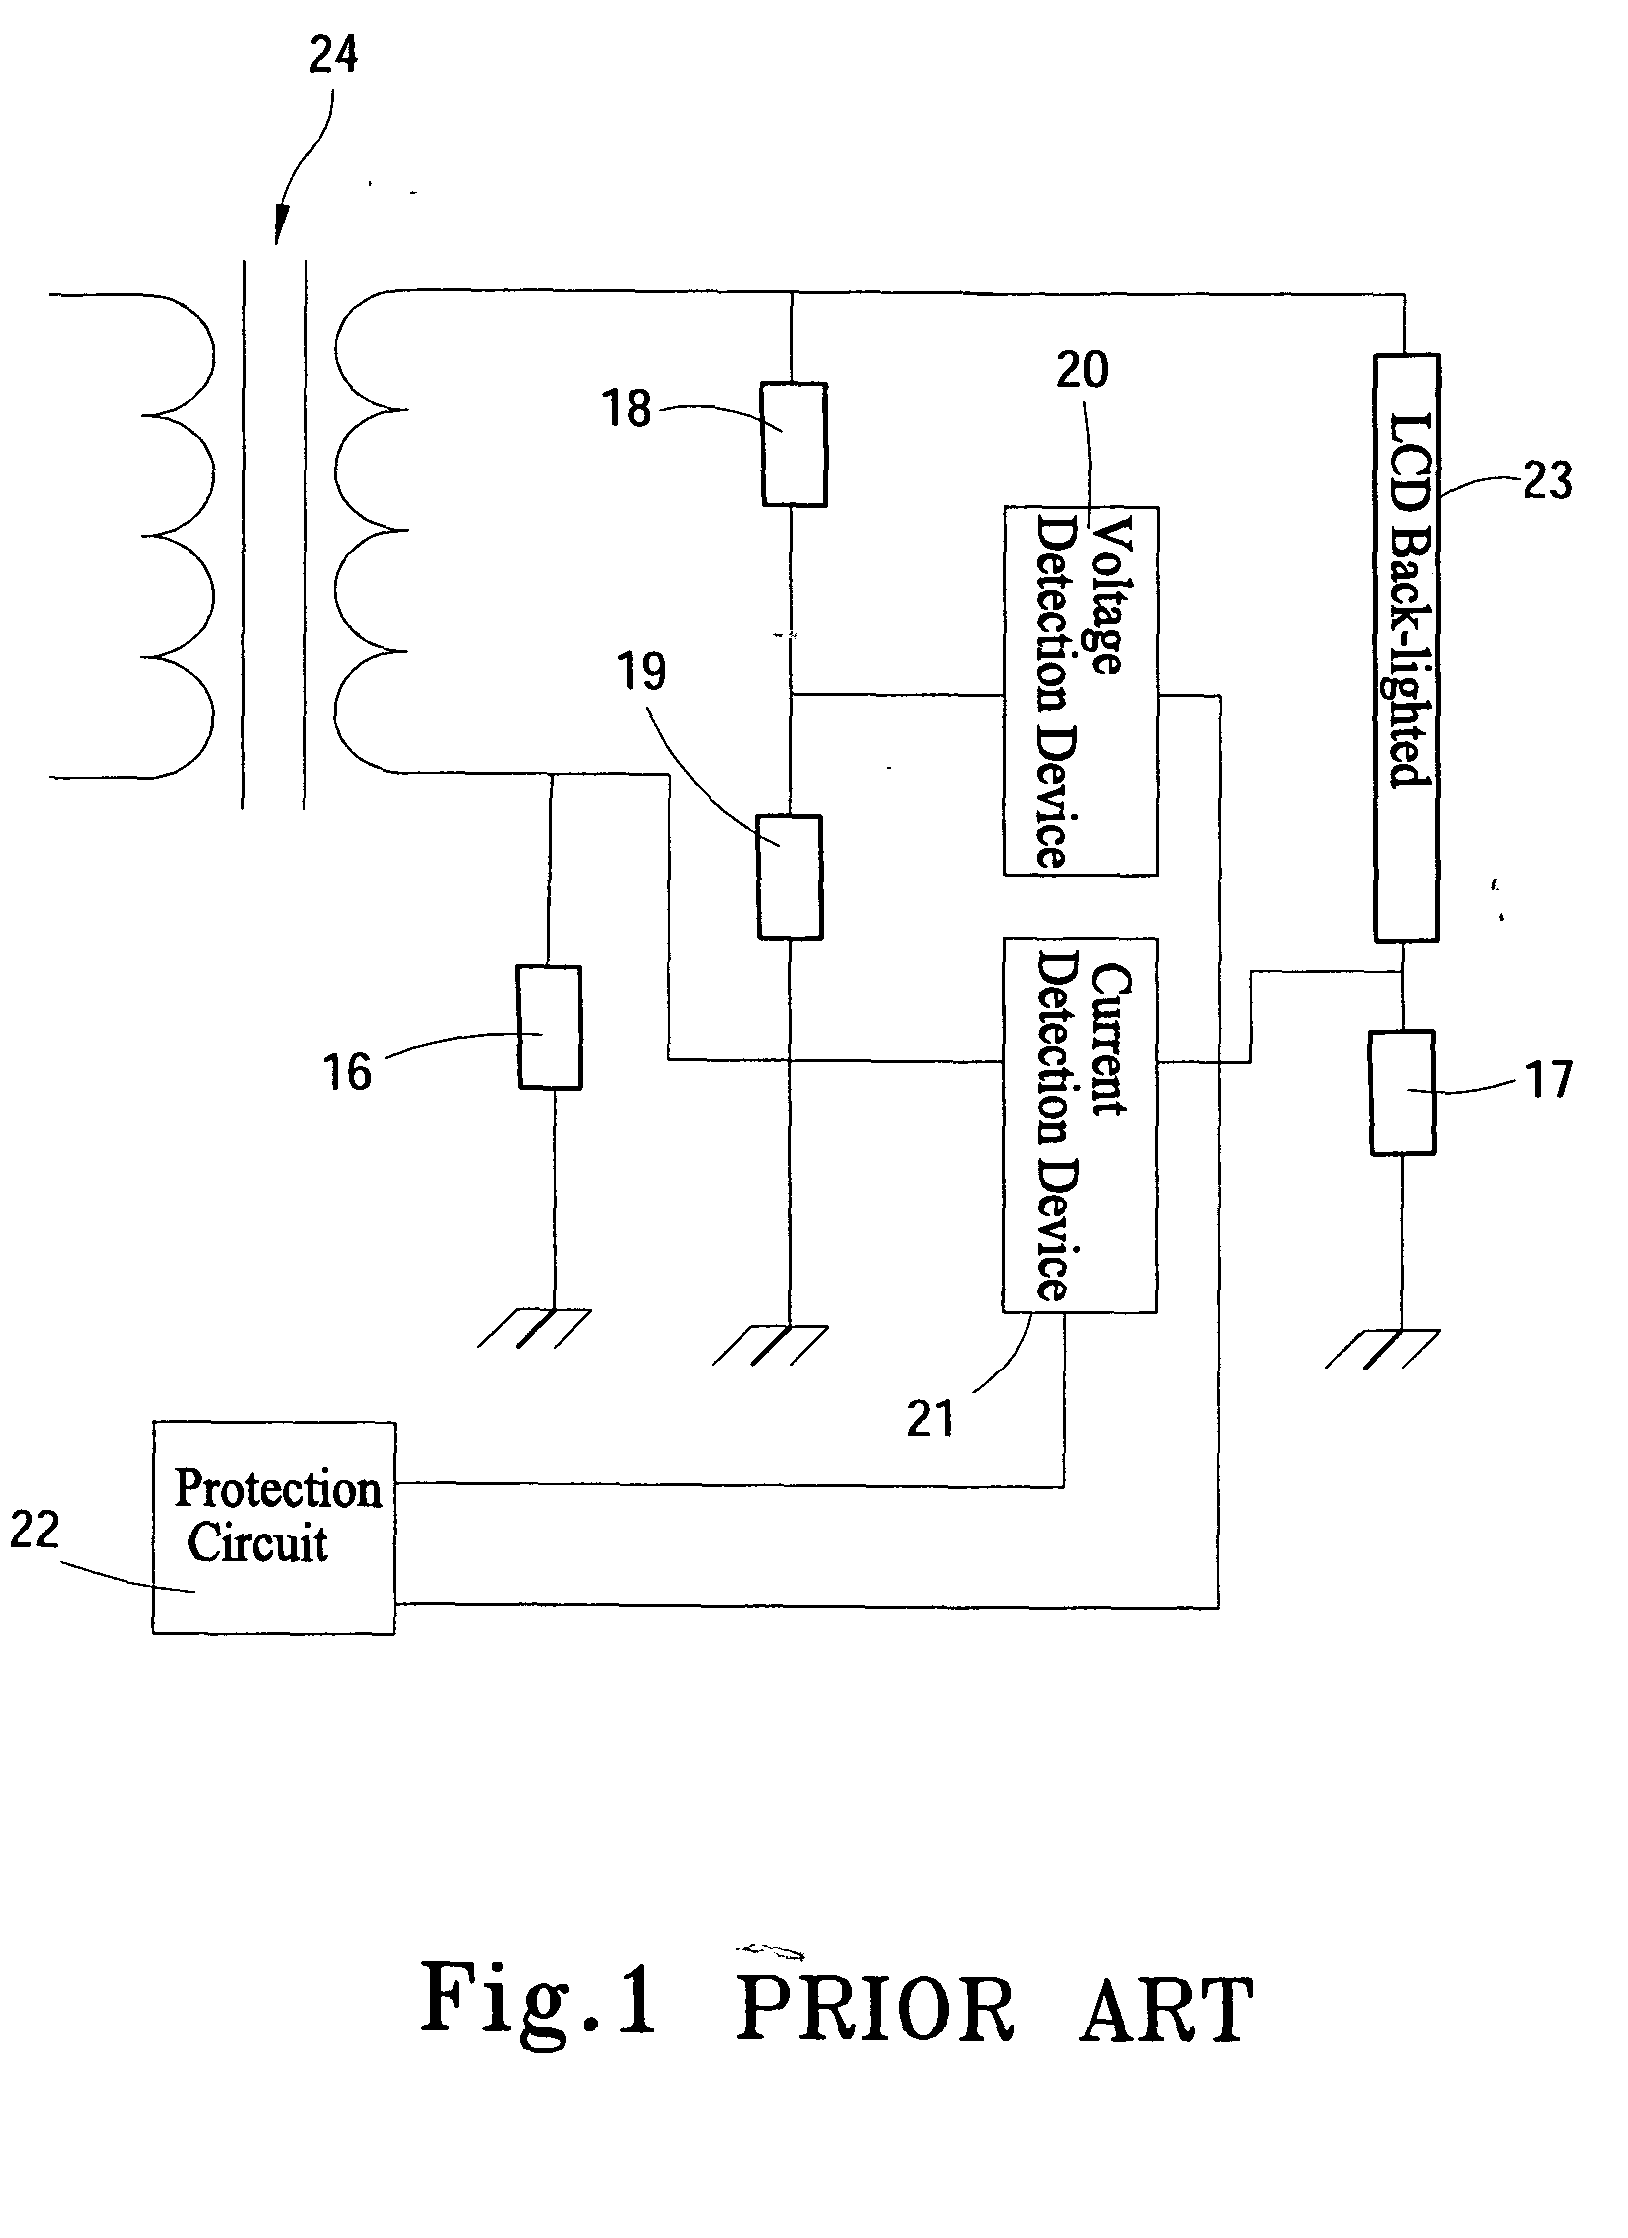 Back-lighted control and protection device for multi-lamp LCD